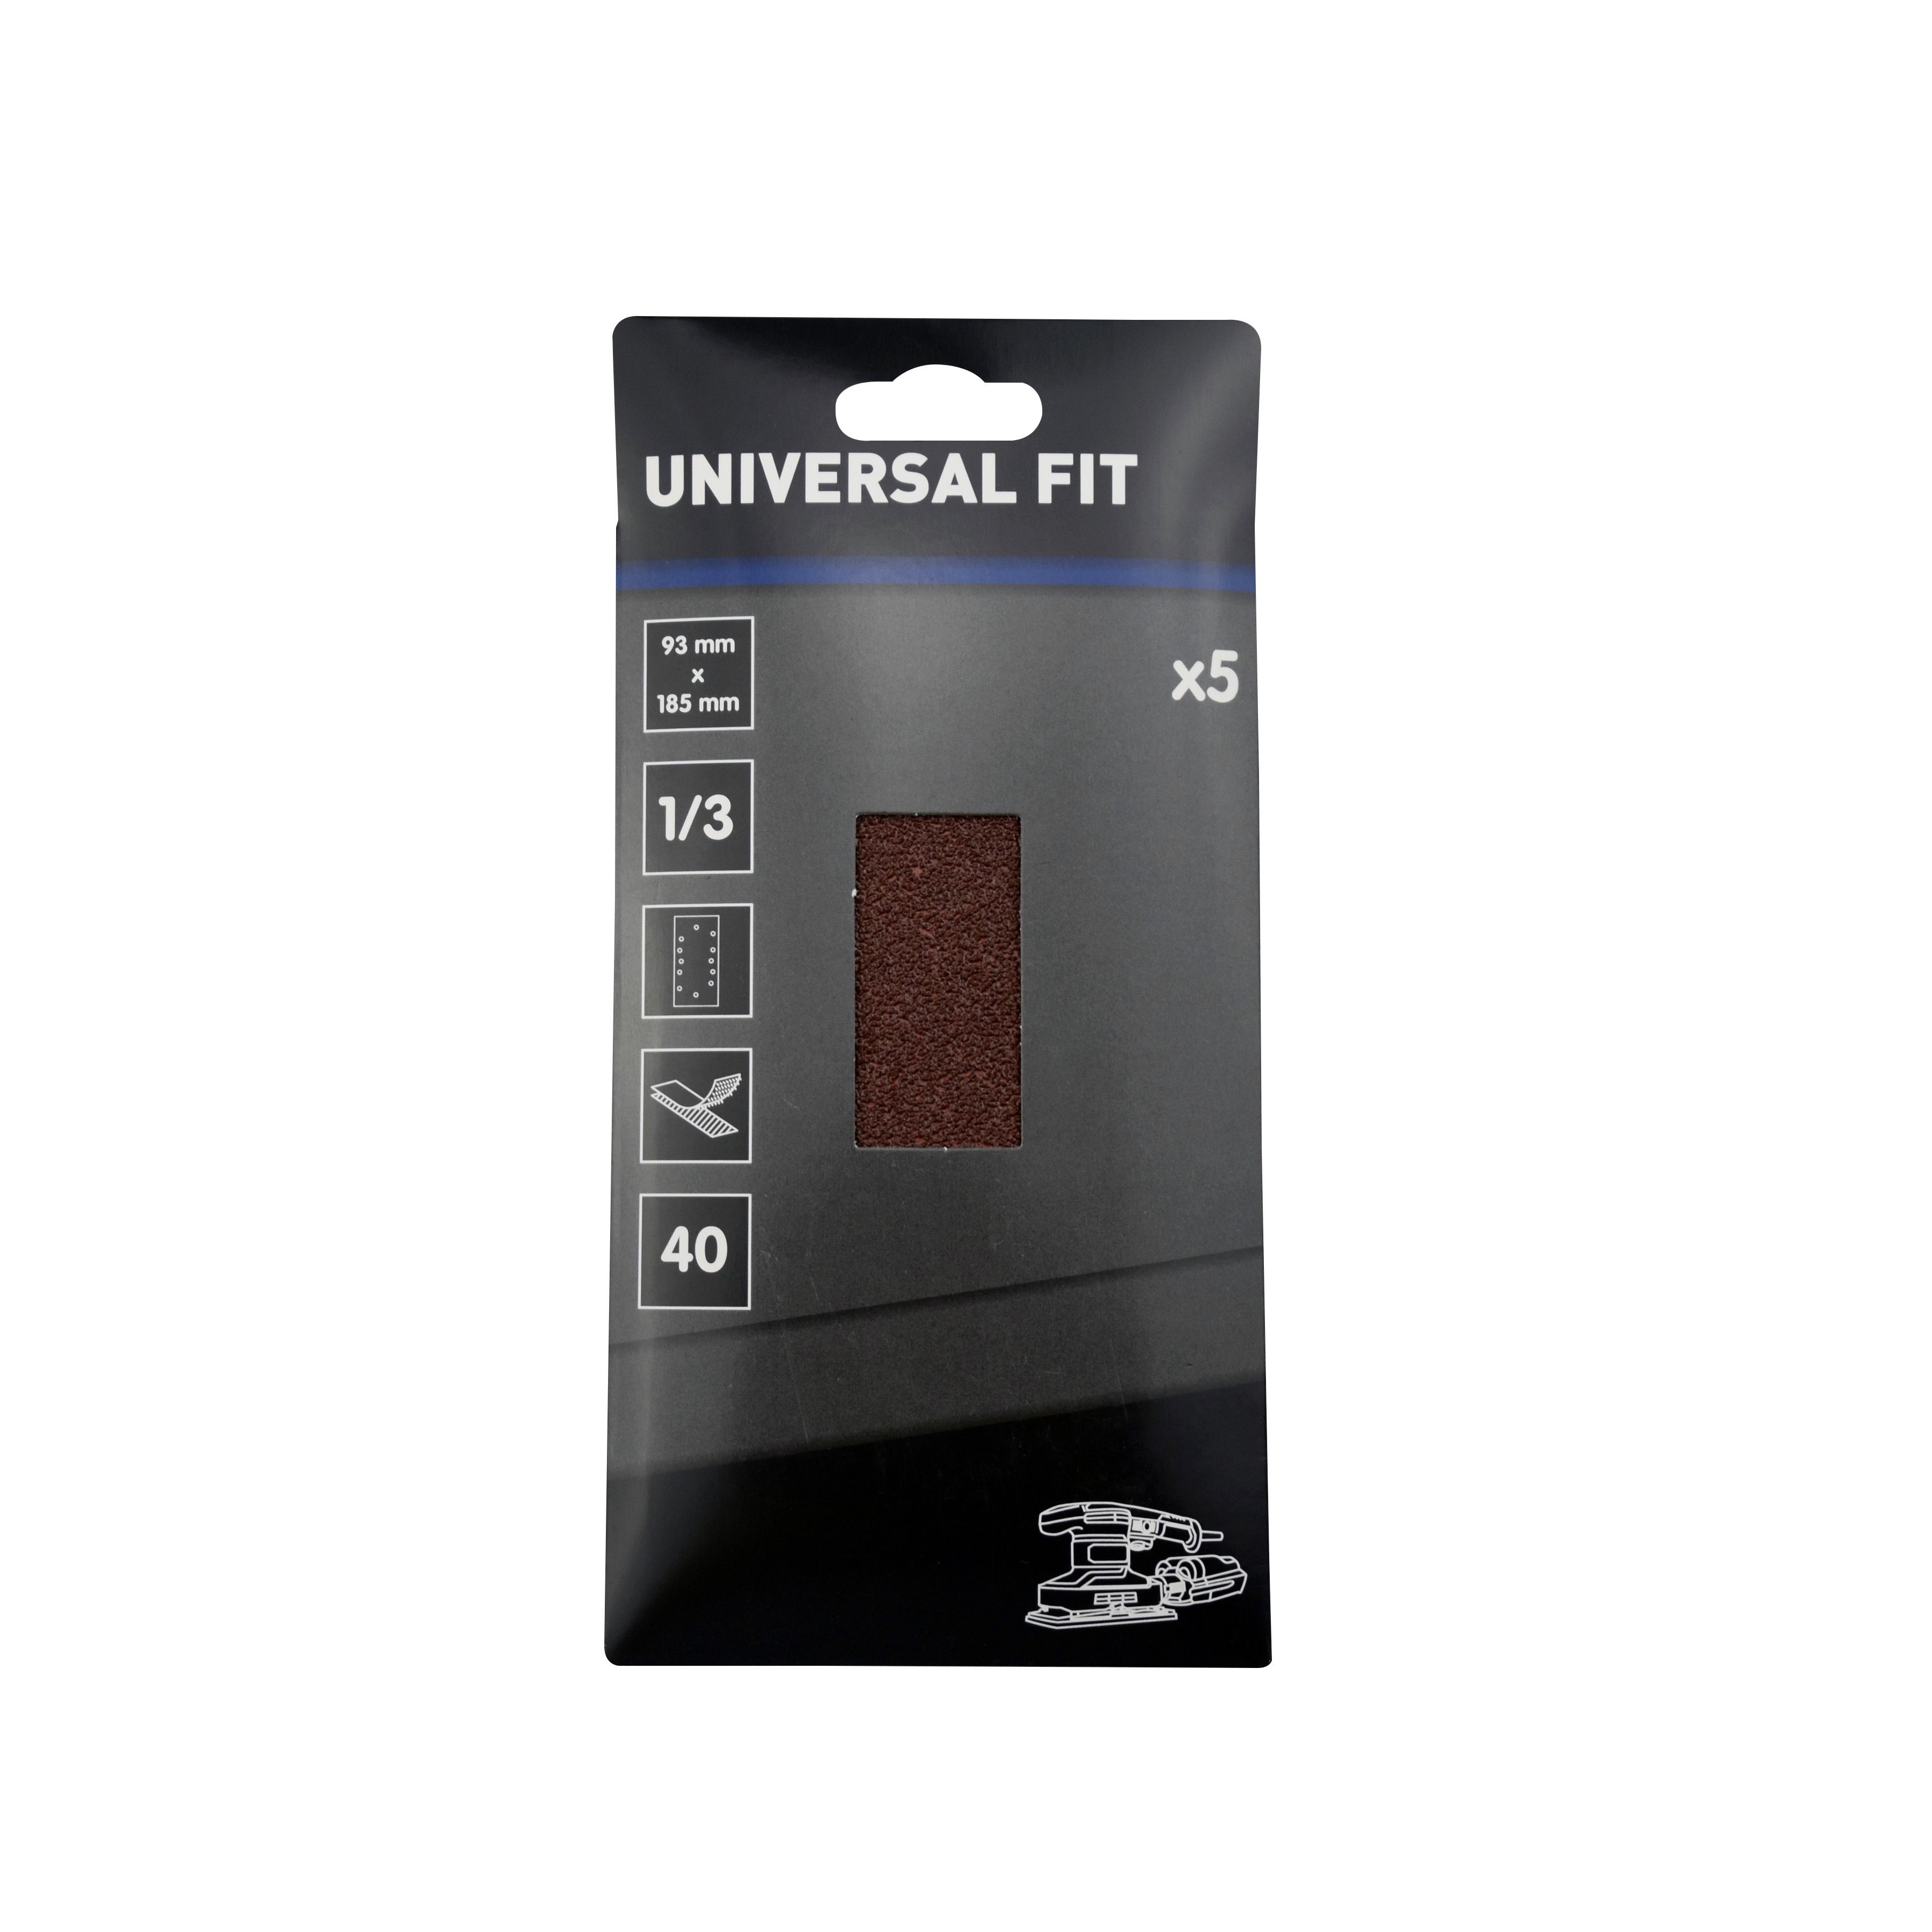 Universal Fit 40 grit Red 1/3 sanding sheet (L)185mm (W)93mm, Pack of 5